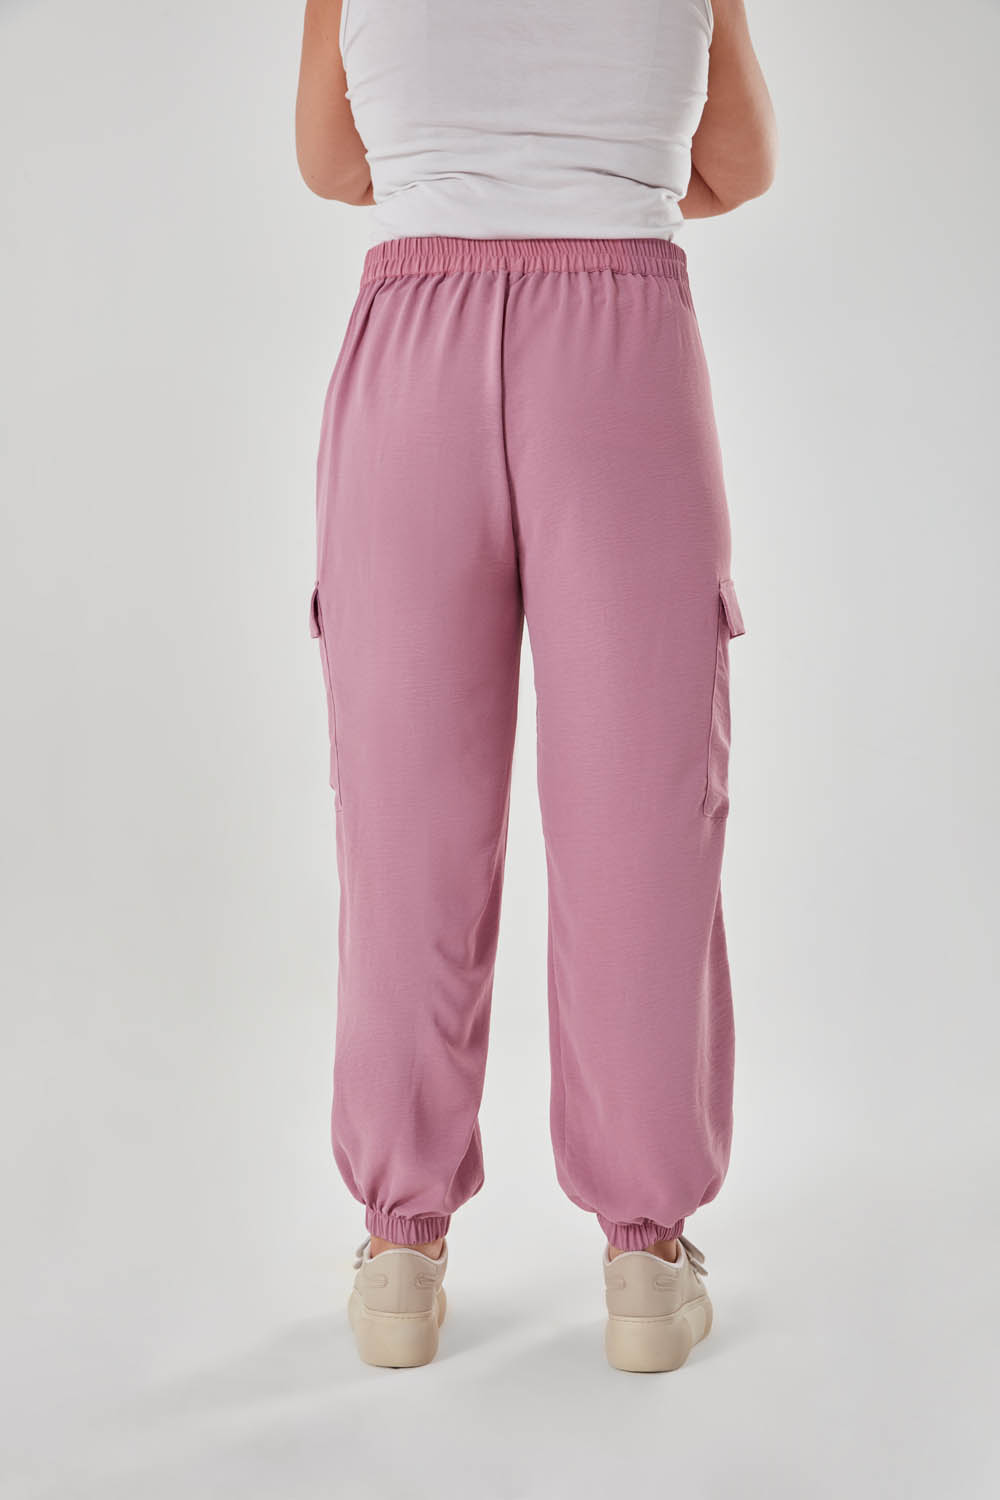 Dusty Rose Woven Trousers with Cargo Pockets